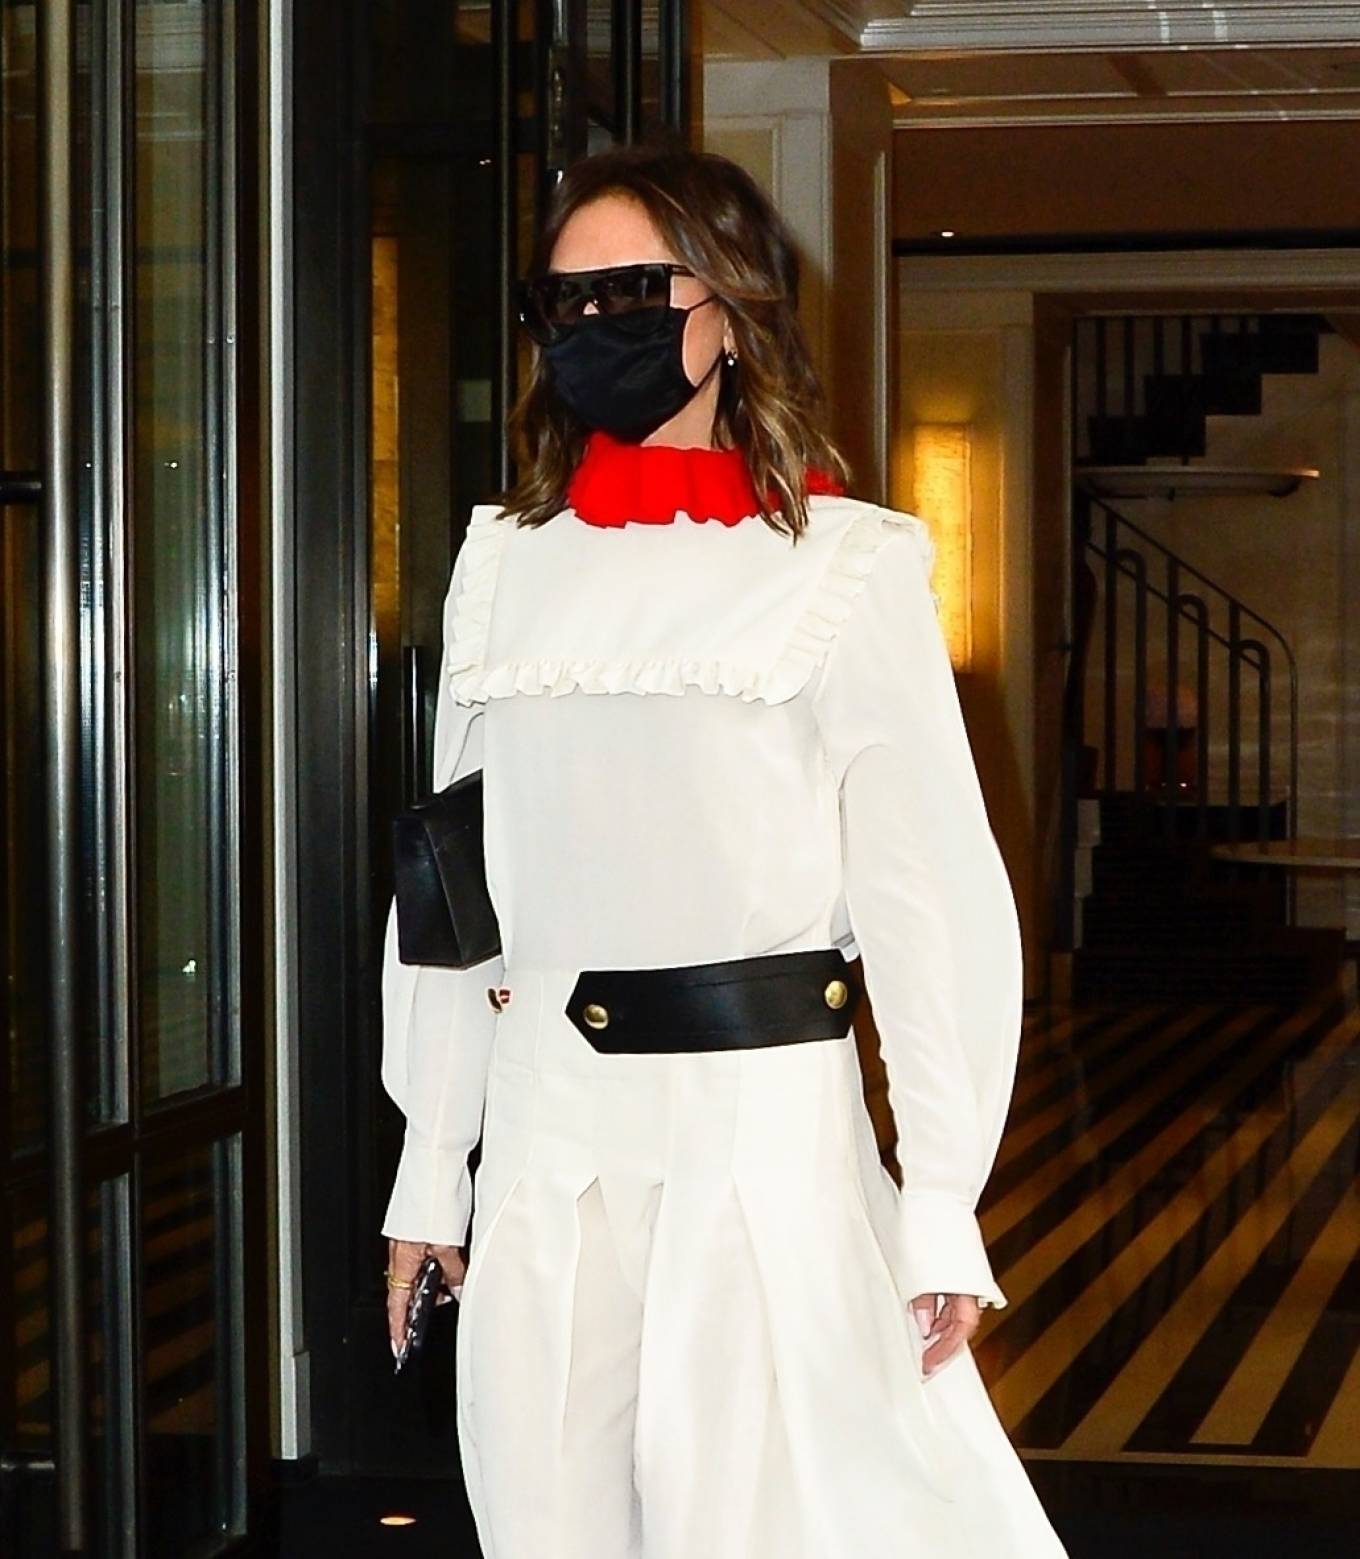 Victoria Beckham 2021 : Victoria Beckham – In white maxi dress steps out in New York-02